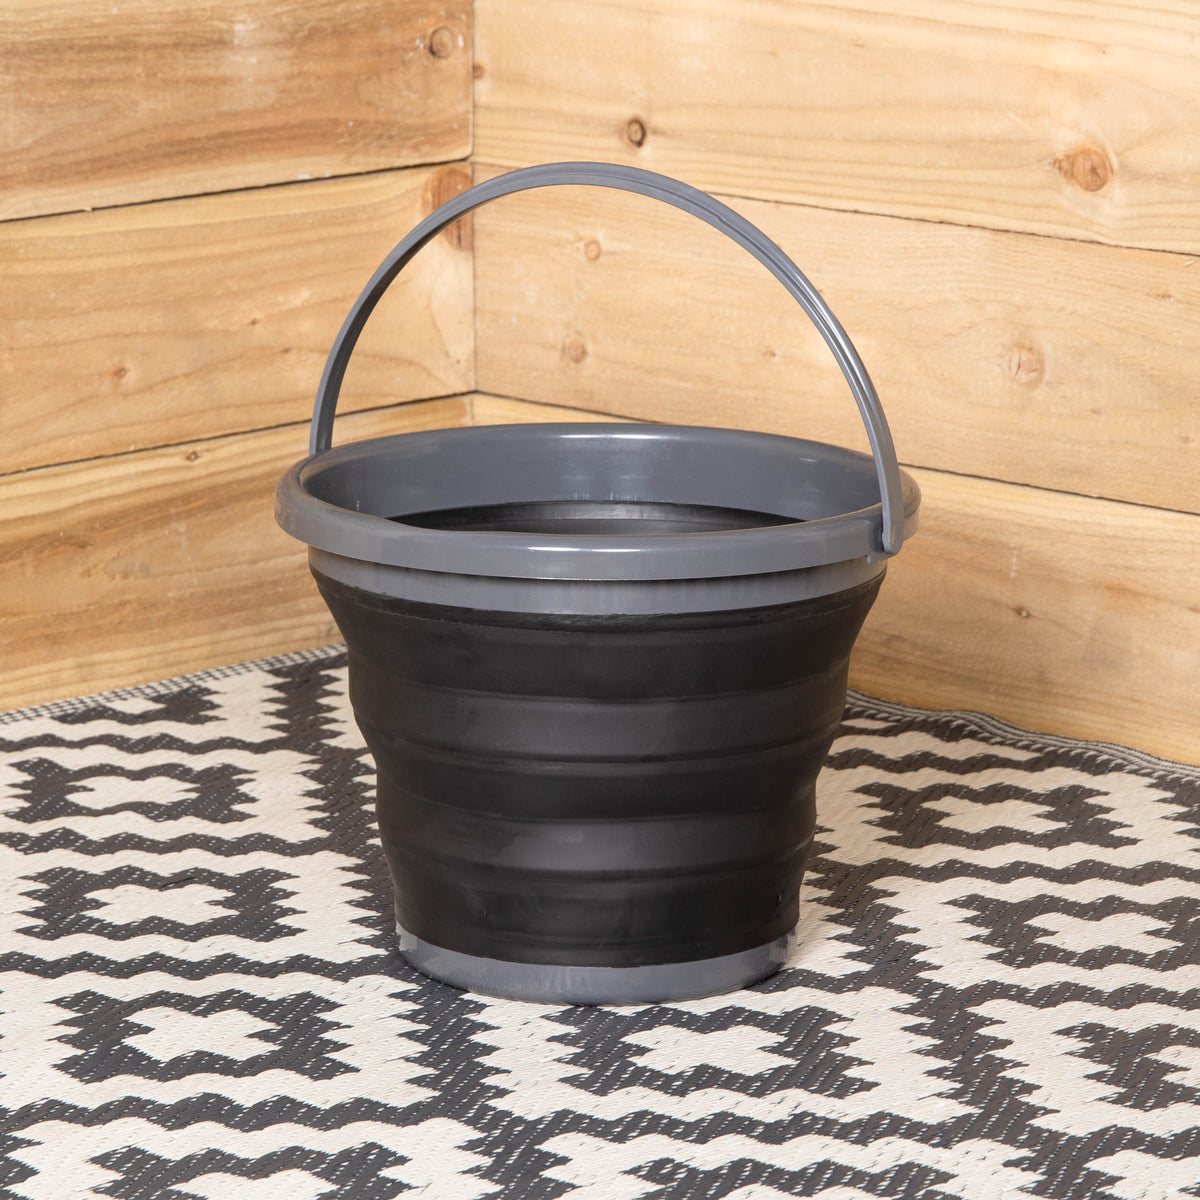 10L Black and Grey Collapsible Round Camping Bucket with Handle